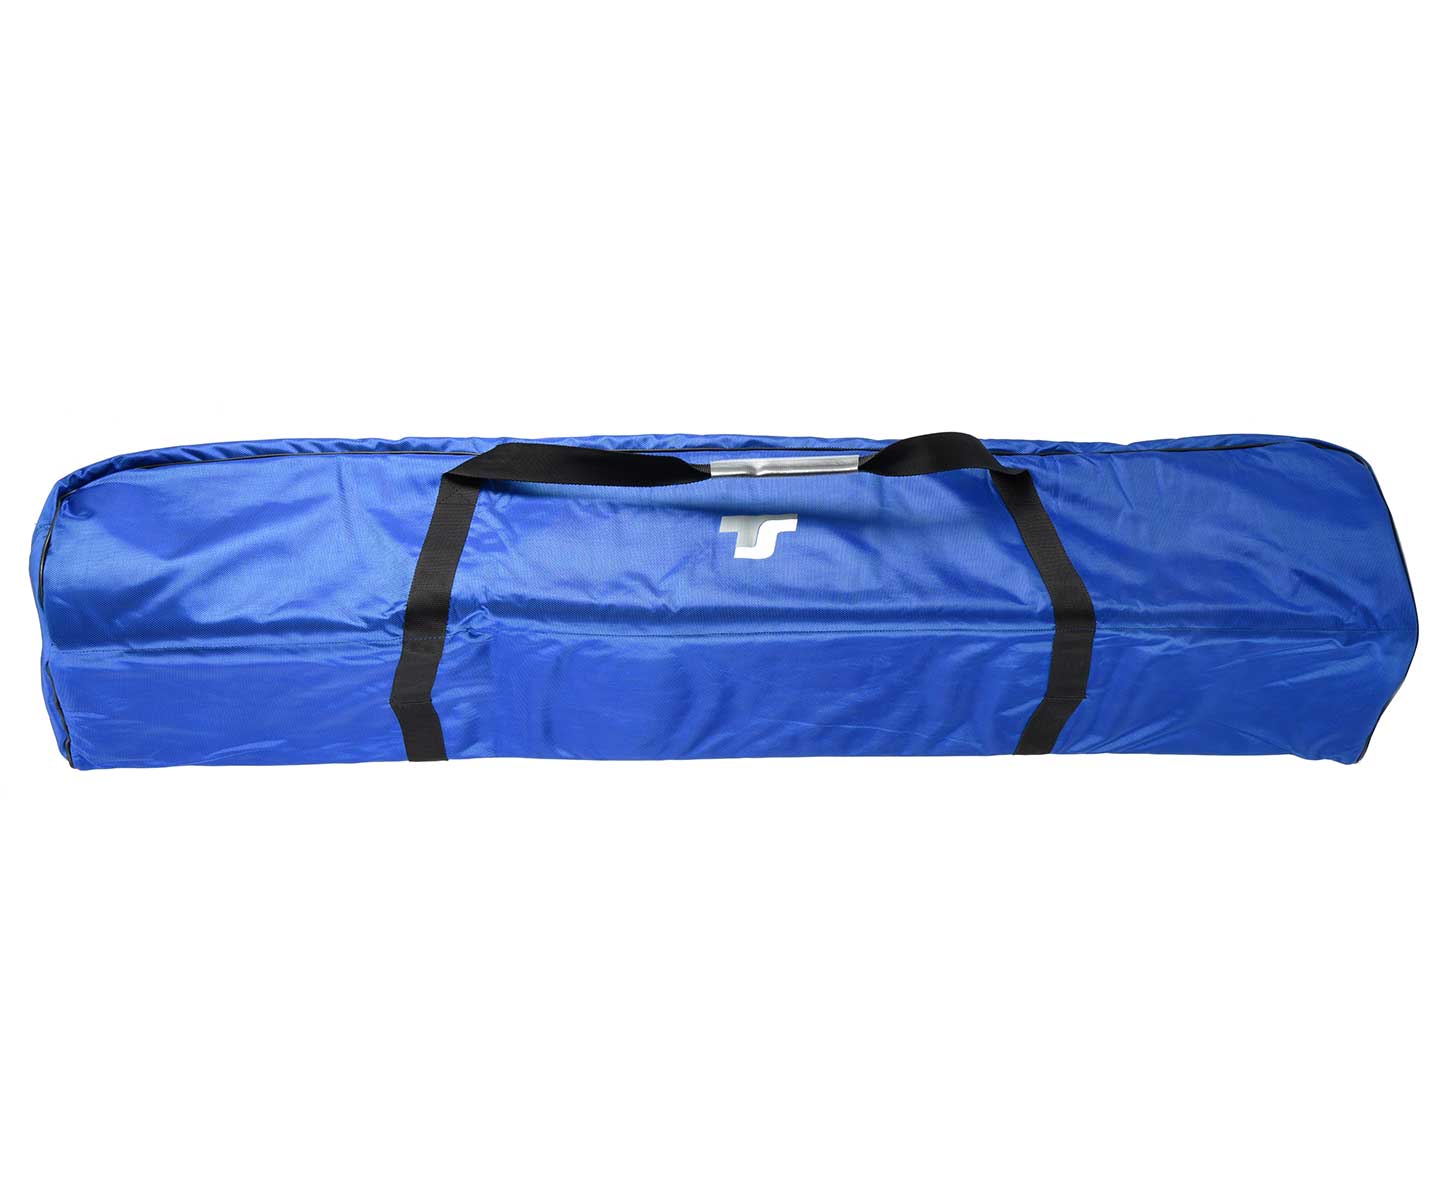    TS-Optics Carrying Bag with extra thick Padding - 132 cm  [EN]  